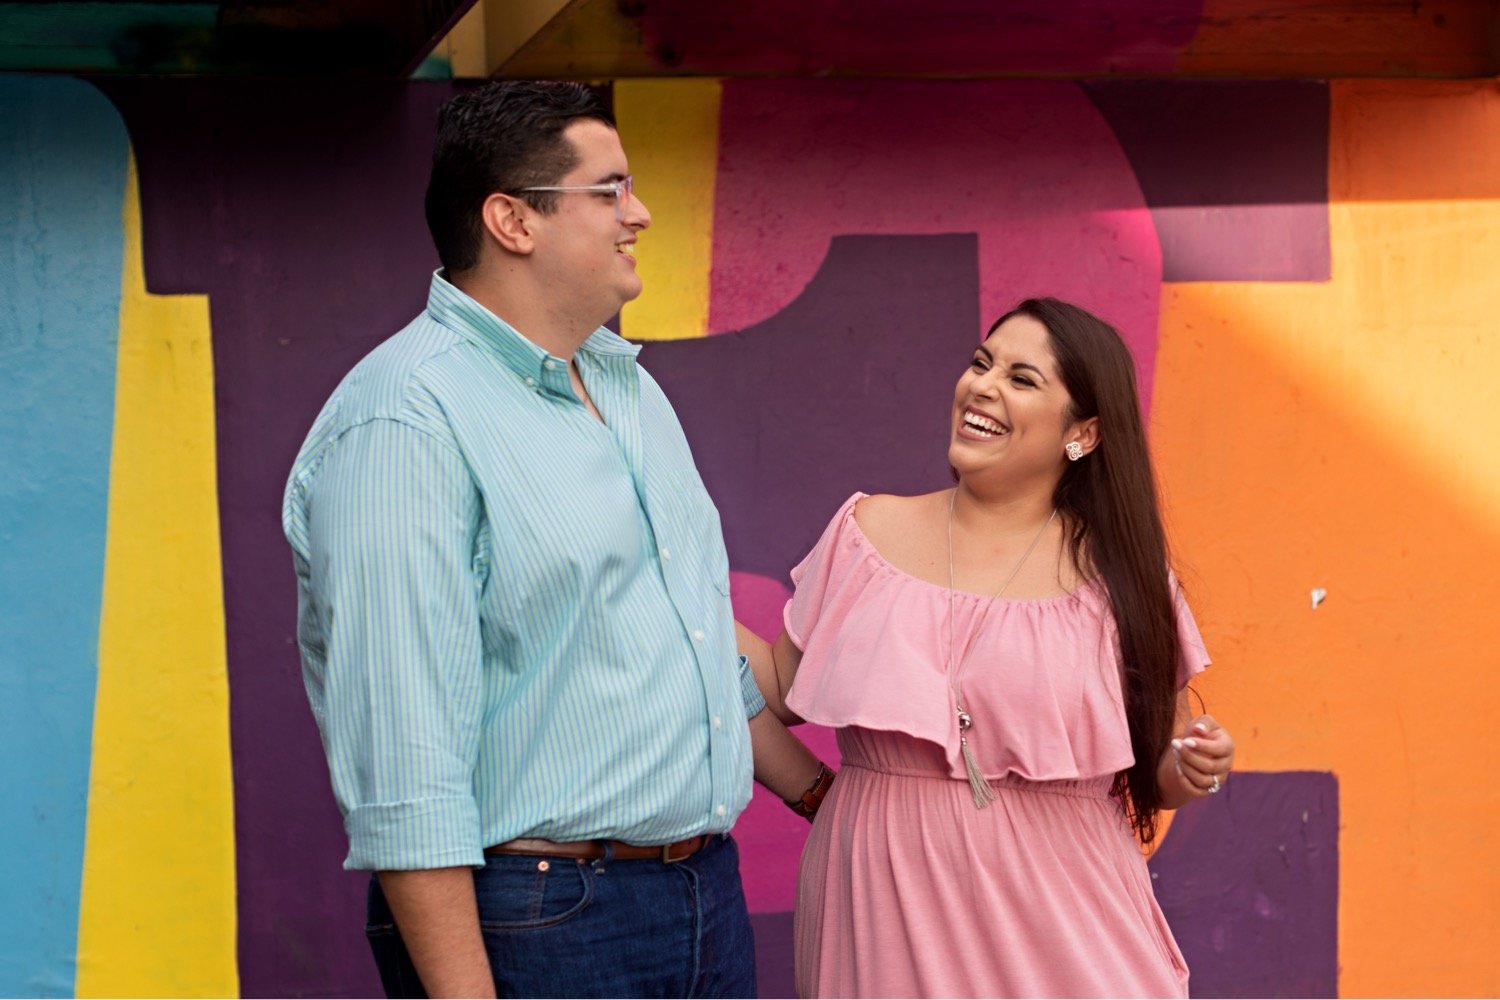 07_Wynwood-Walls-Engagement-Session-Miami-Engagement-Photographer_6589 1_posing_during_couple_in_walls_engagement_wynwood_hispanic_a_session_Mural_thier_of_front_Miami_photographer.jpg